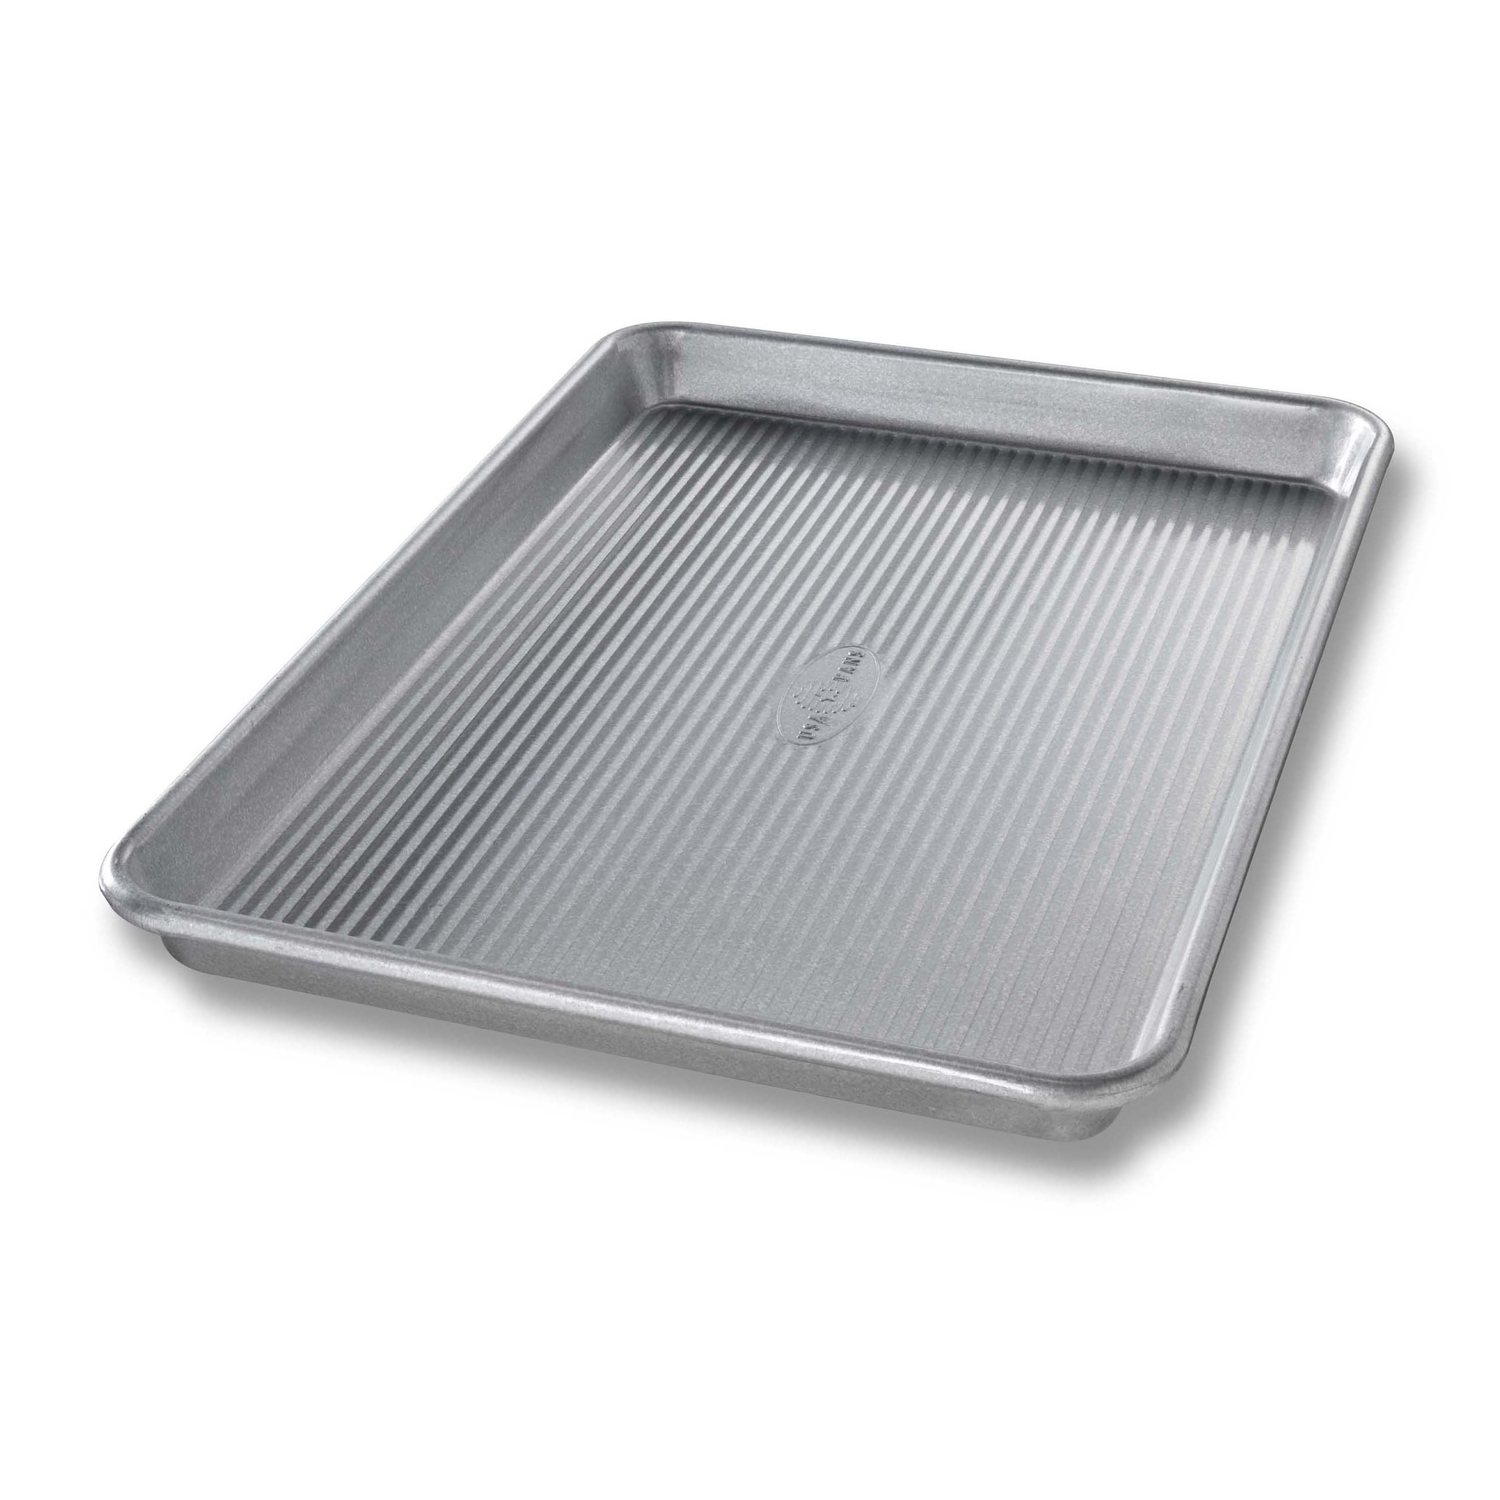 Photos - Other Accessories USA Pan 9-3/4 in. W X 14-3/4 in. L Jelly Roll Pan Silver 1040JR-6